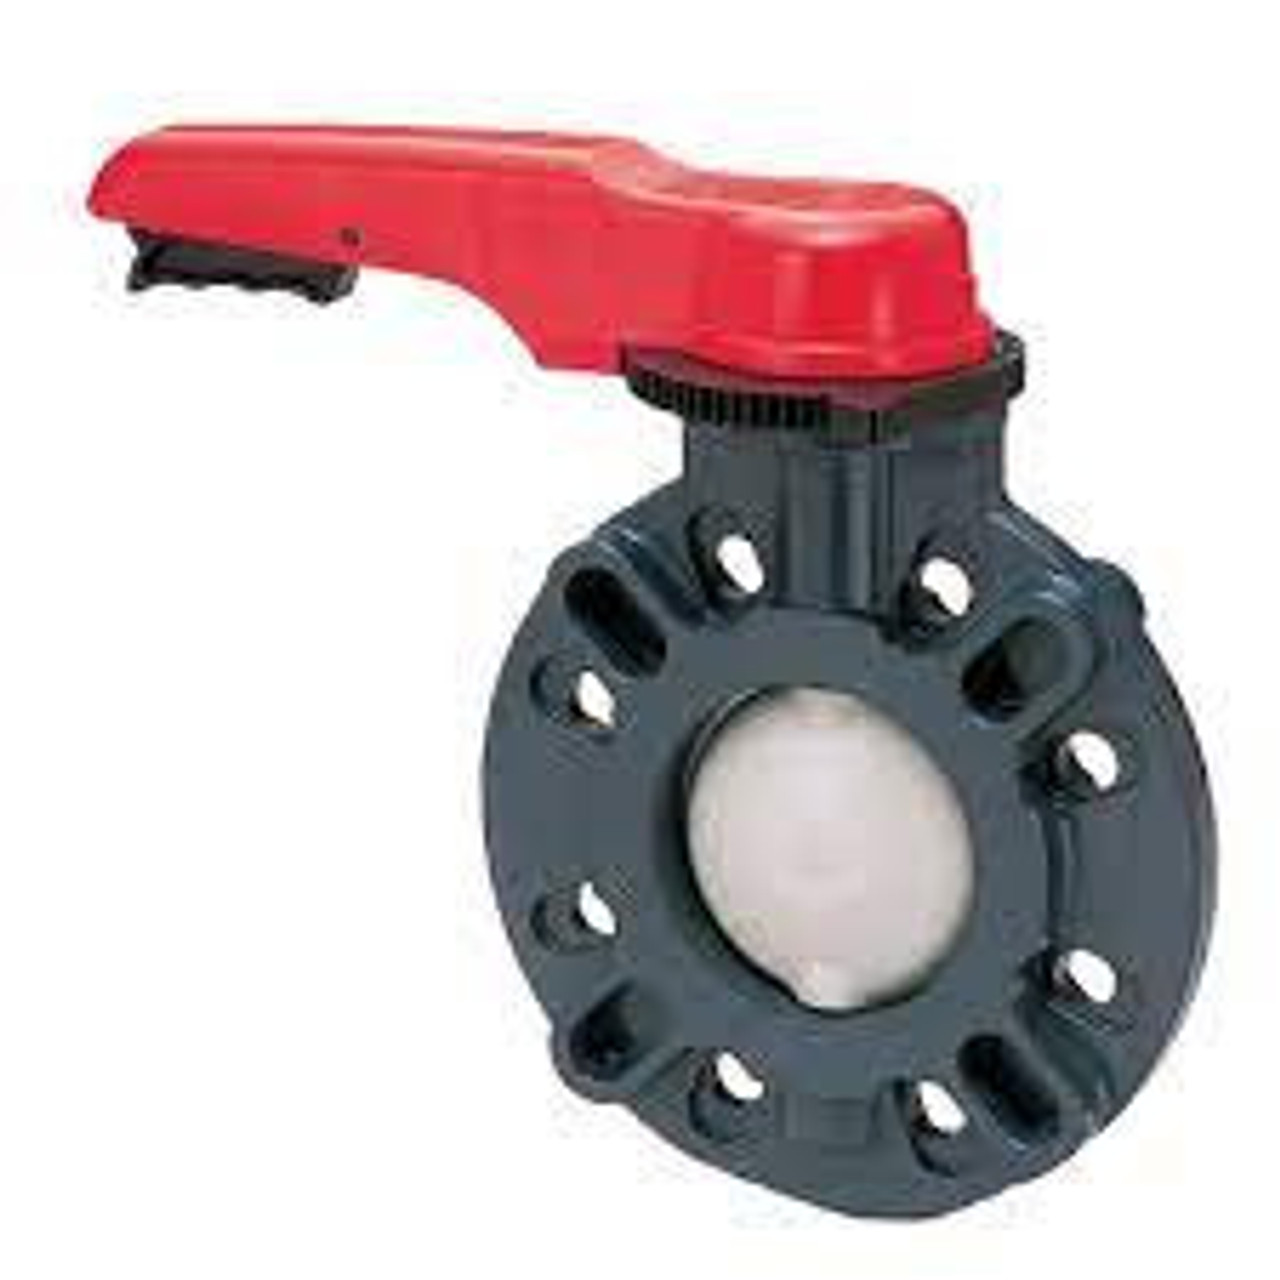 Asahi Type 57 4" Butterfly Valve - Lever Operated EPDM PP PVC